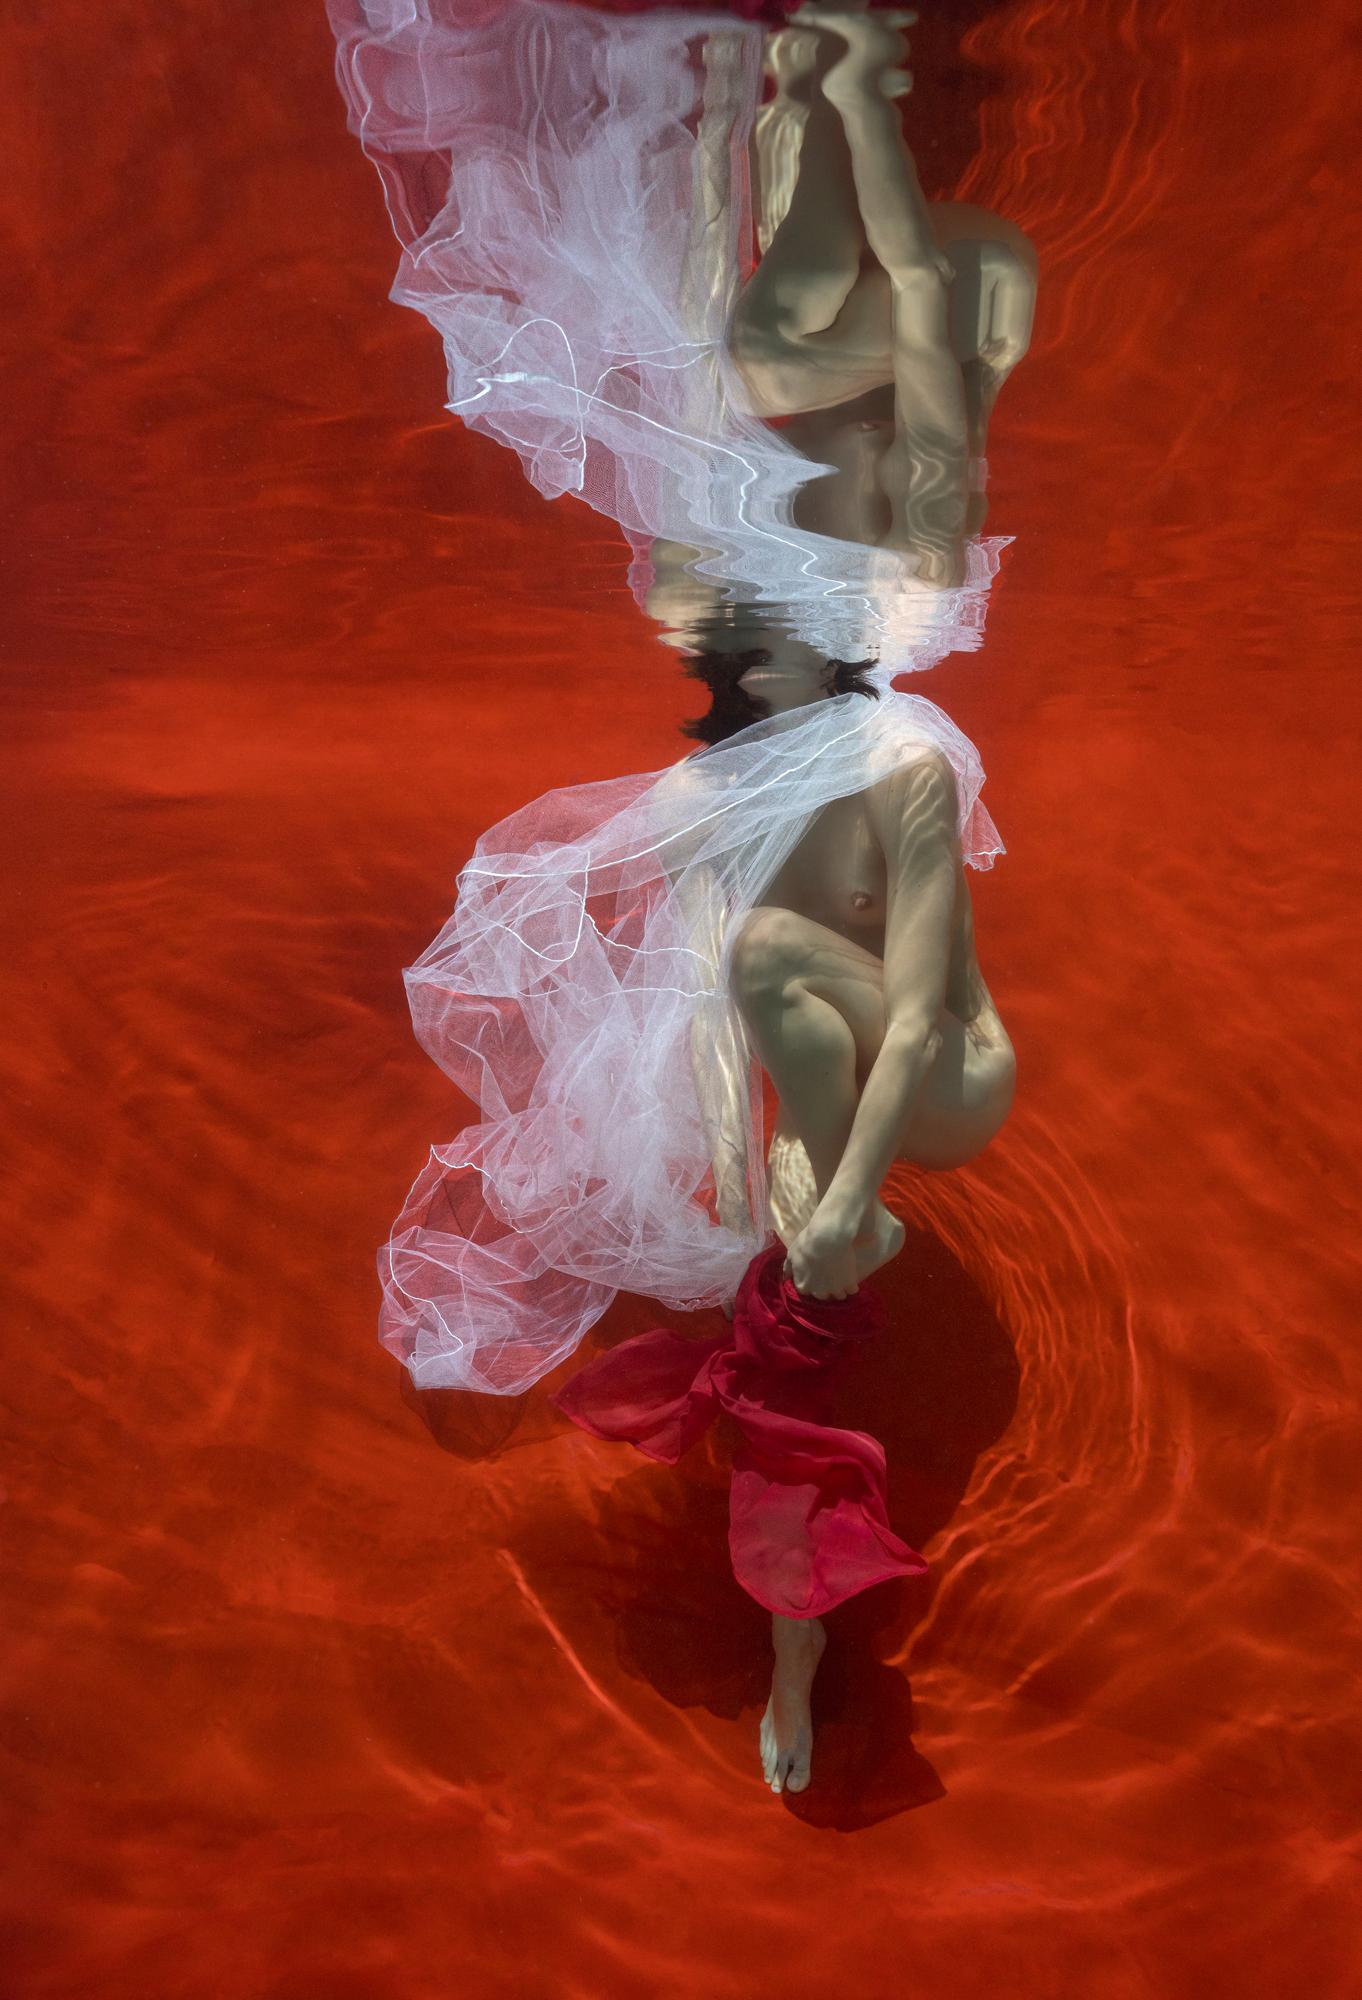 Blood and Milk V   - underwater nude photograph - print on aluminum 36" x 24"